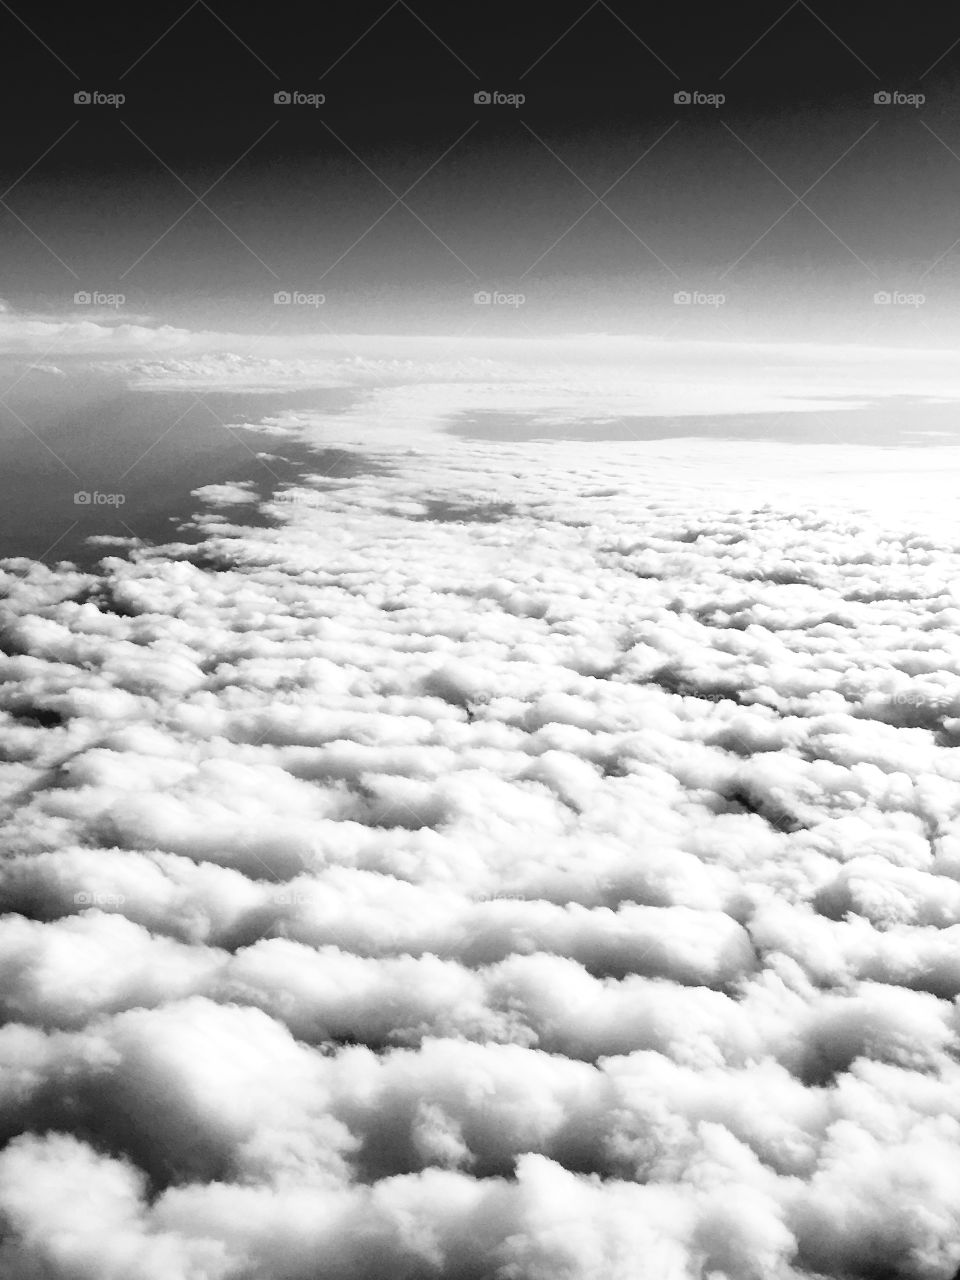 Looking down on clouds from above, in black and white.